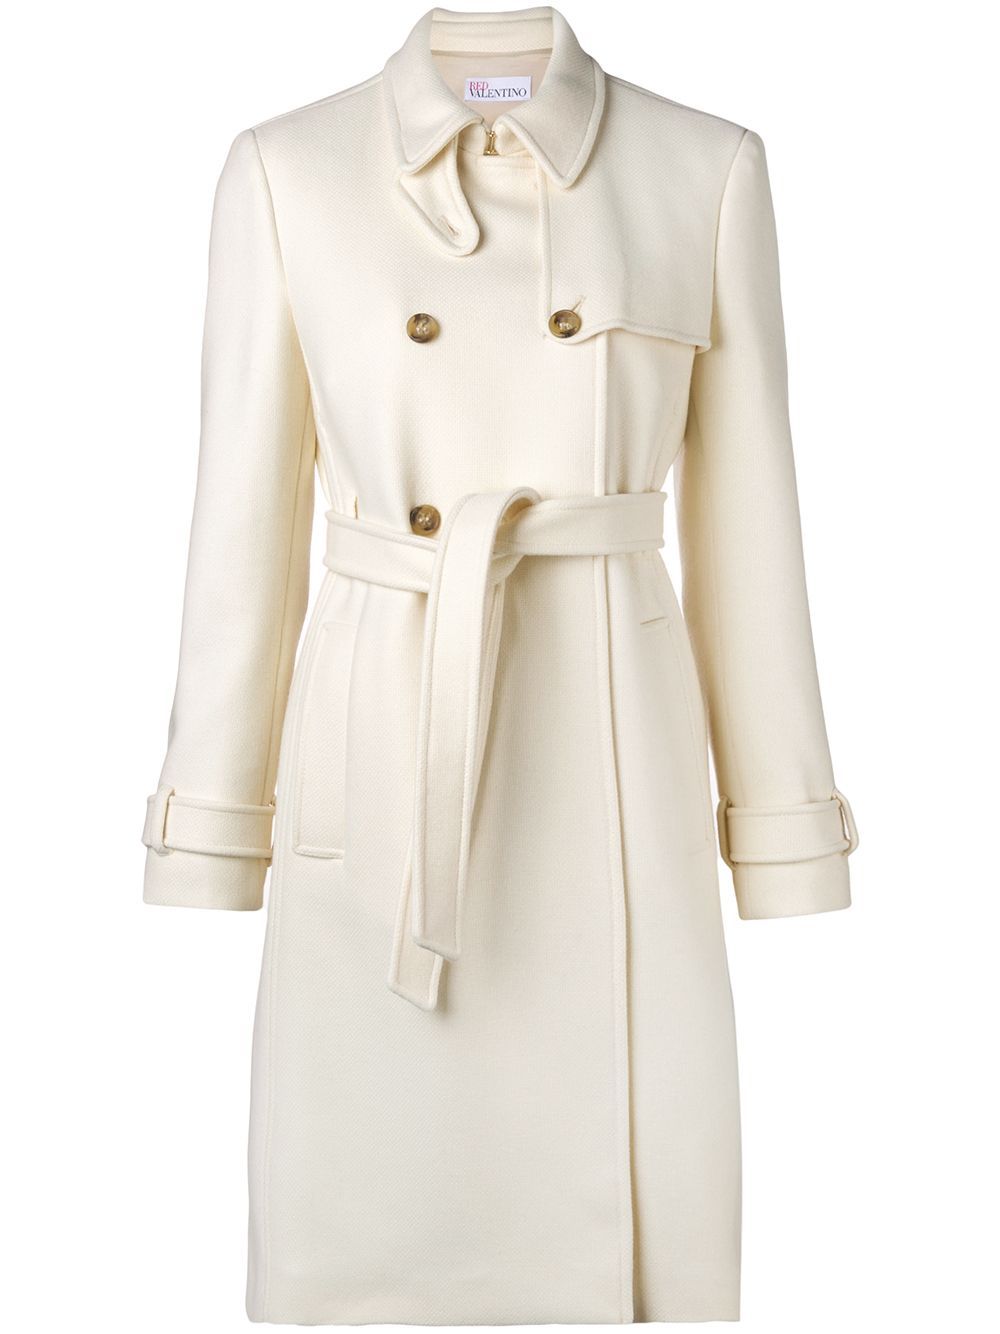 Red Valentino double breasted coat - White | FarFetch Global